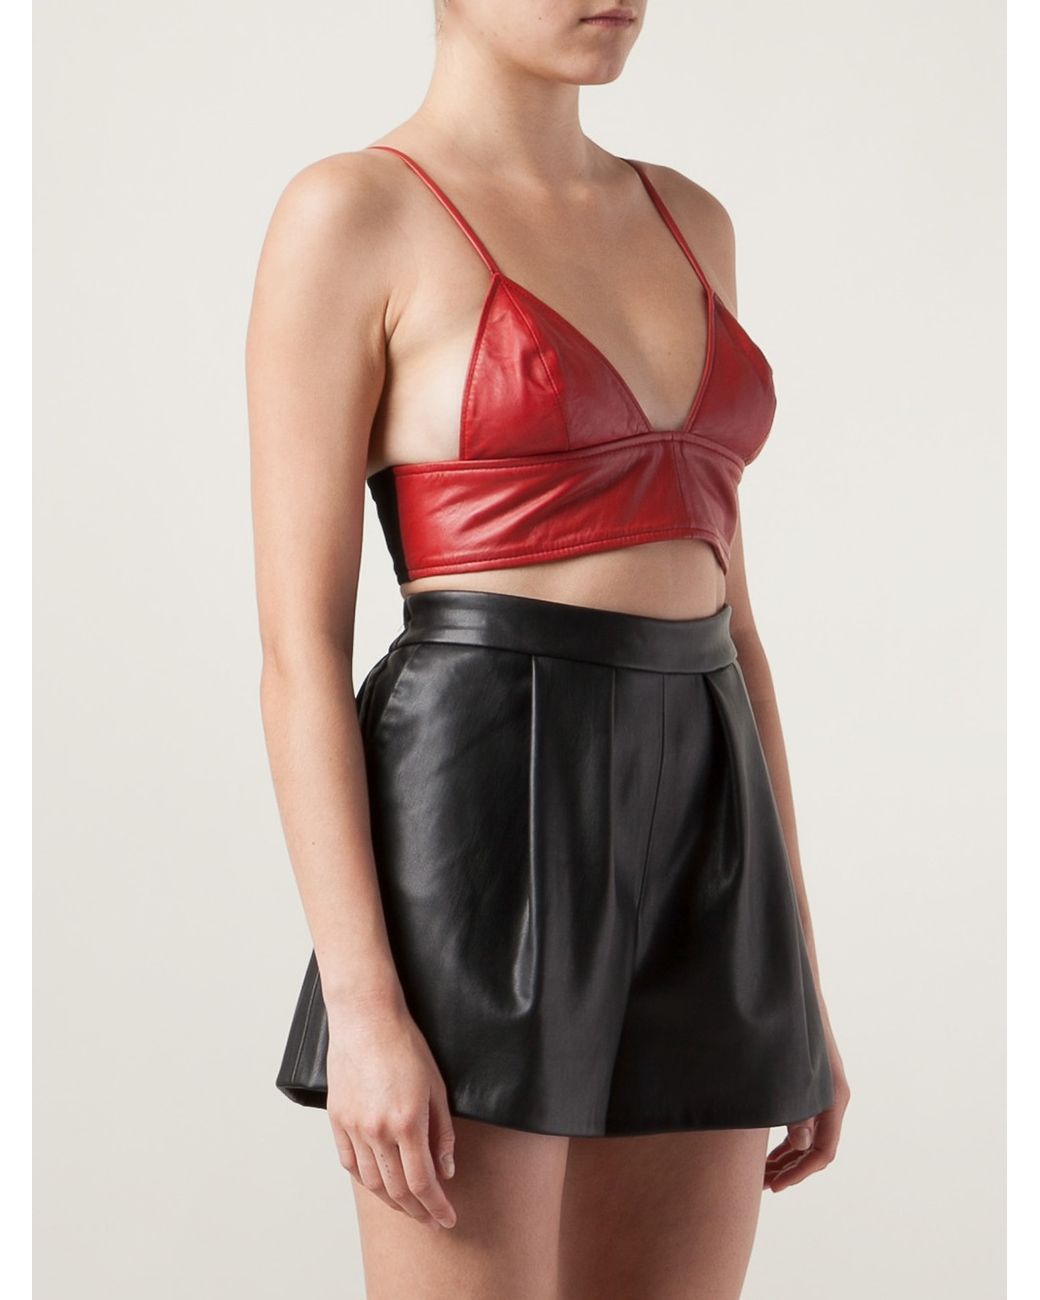 Love Leather Bralette Top in Red | Lyst